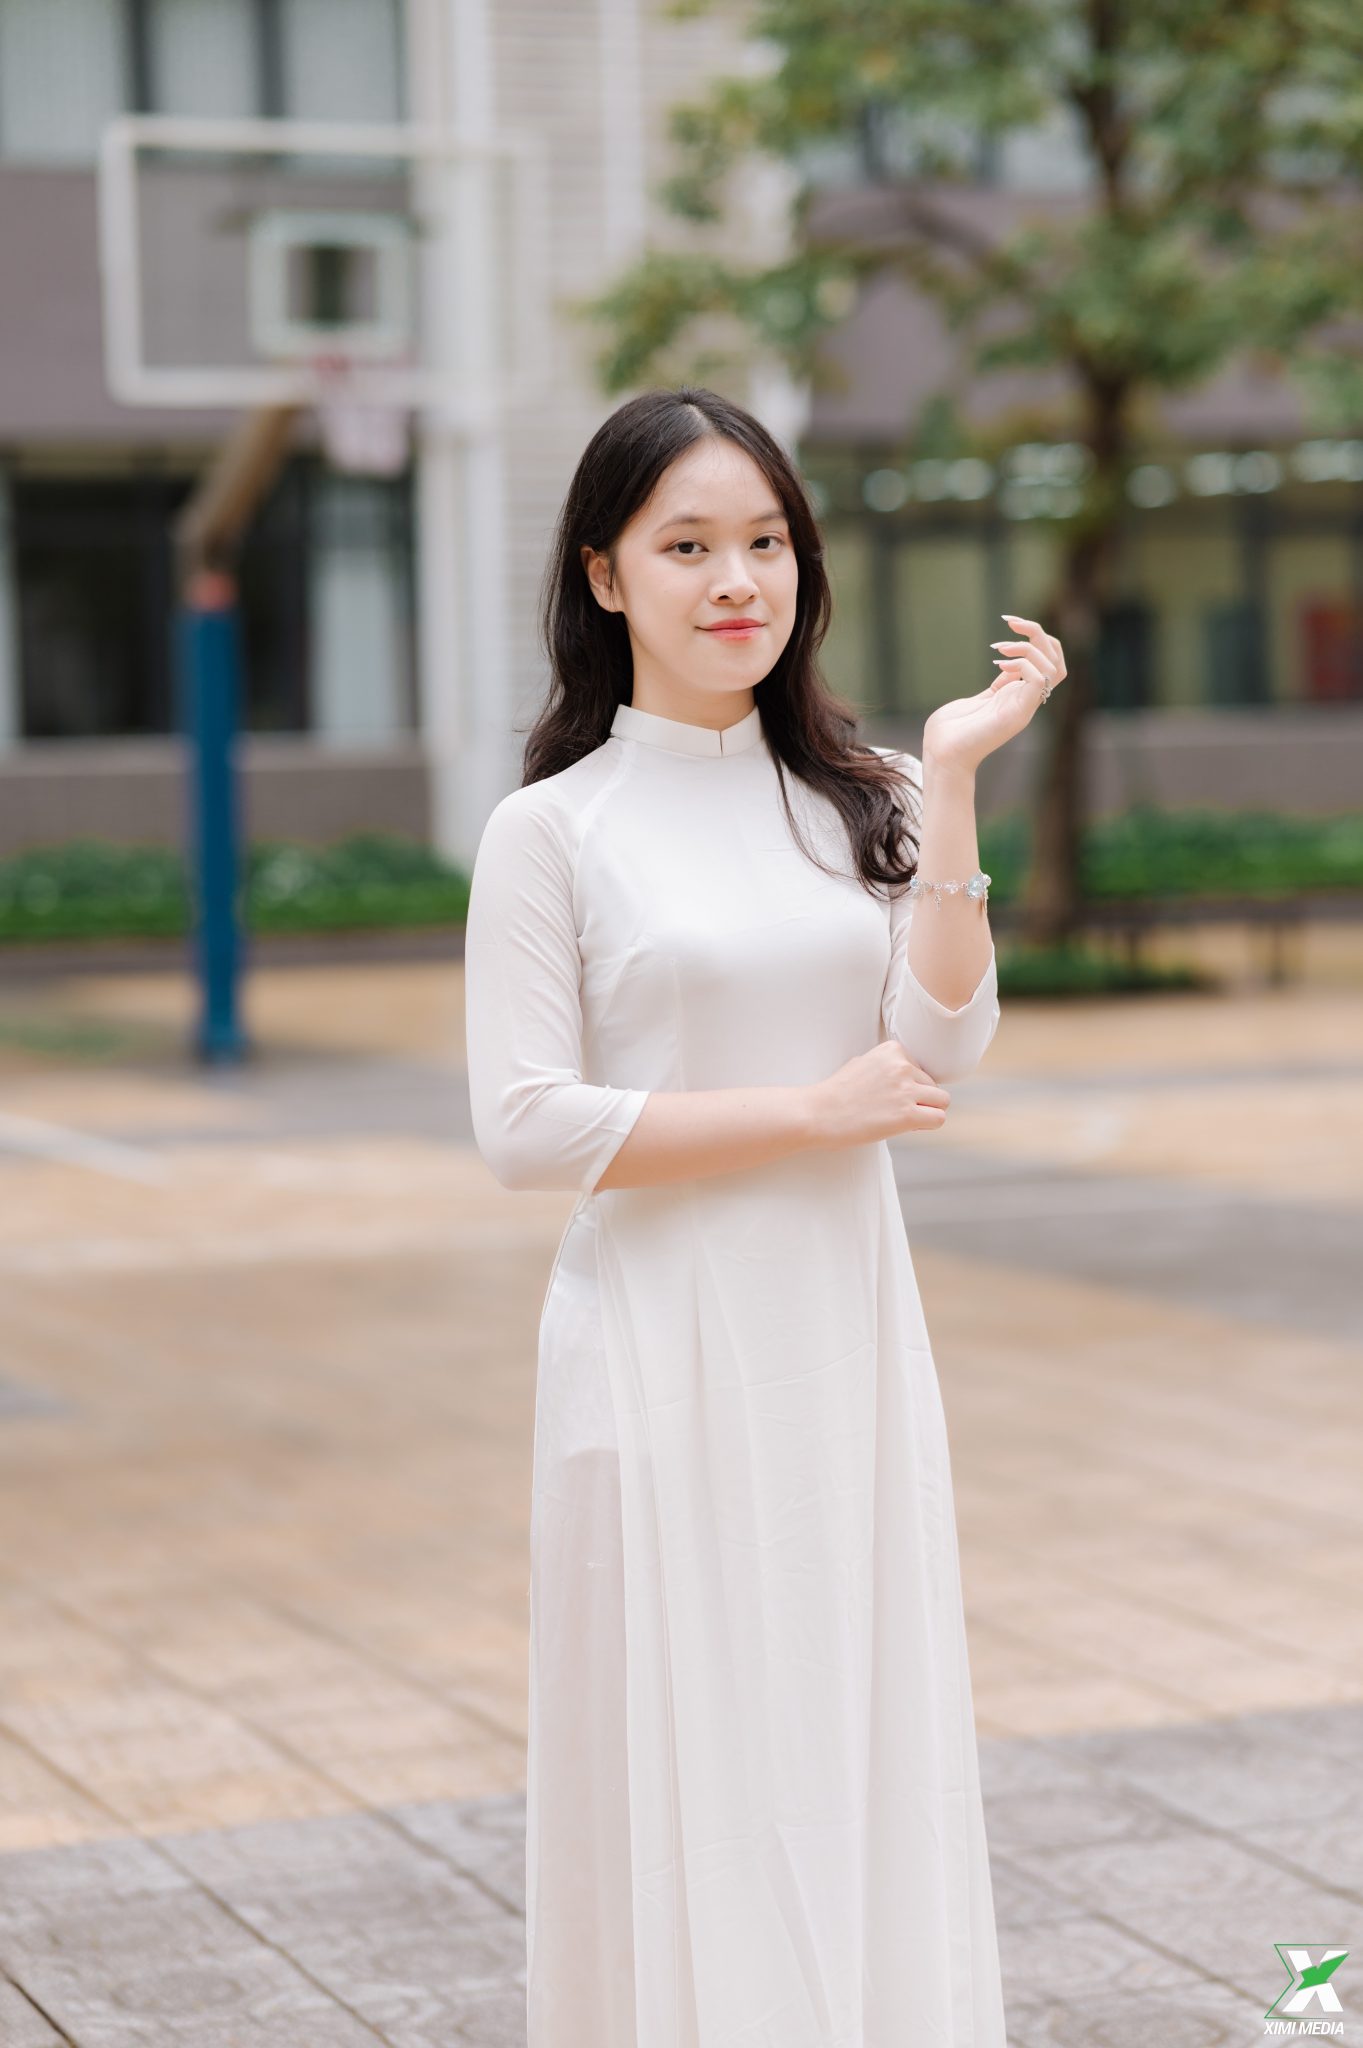 Bùi Hồng Hạnh – the Vinser who won a series of prestigious scholarships from nine leading universities in the Arts in the United States